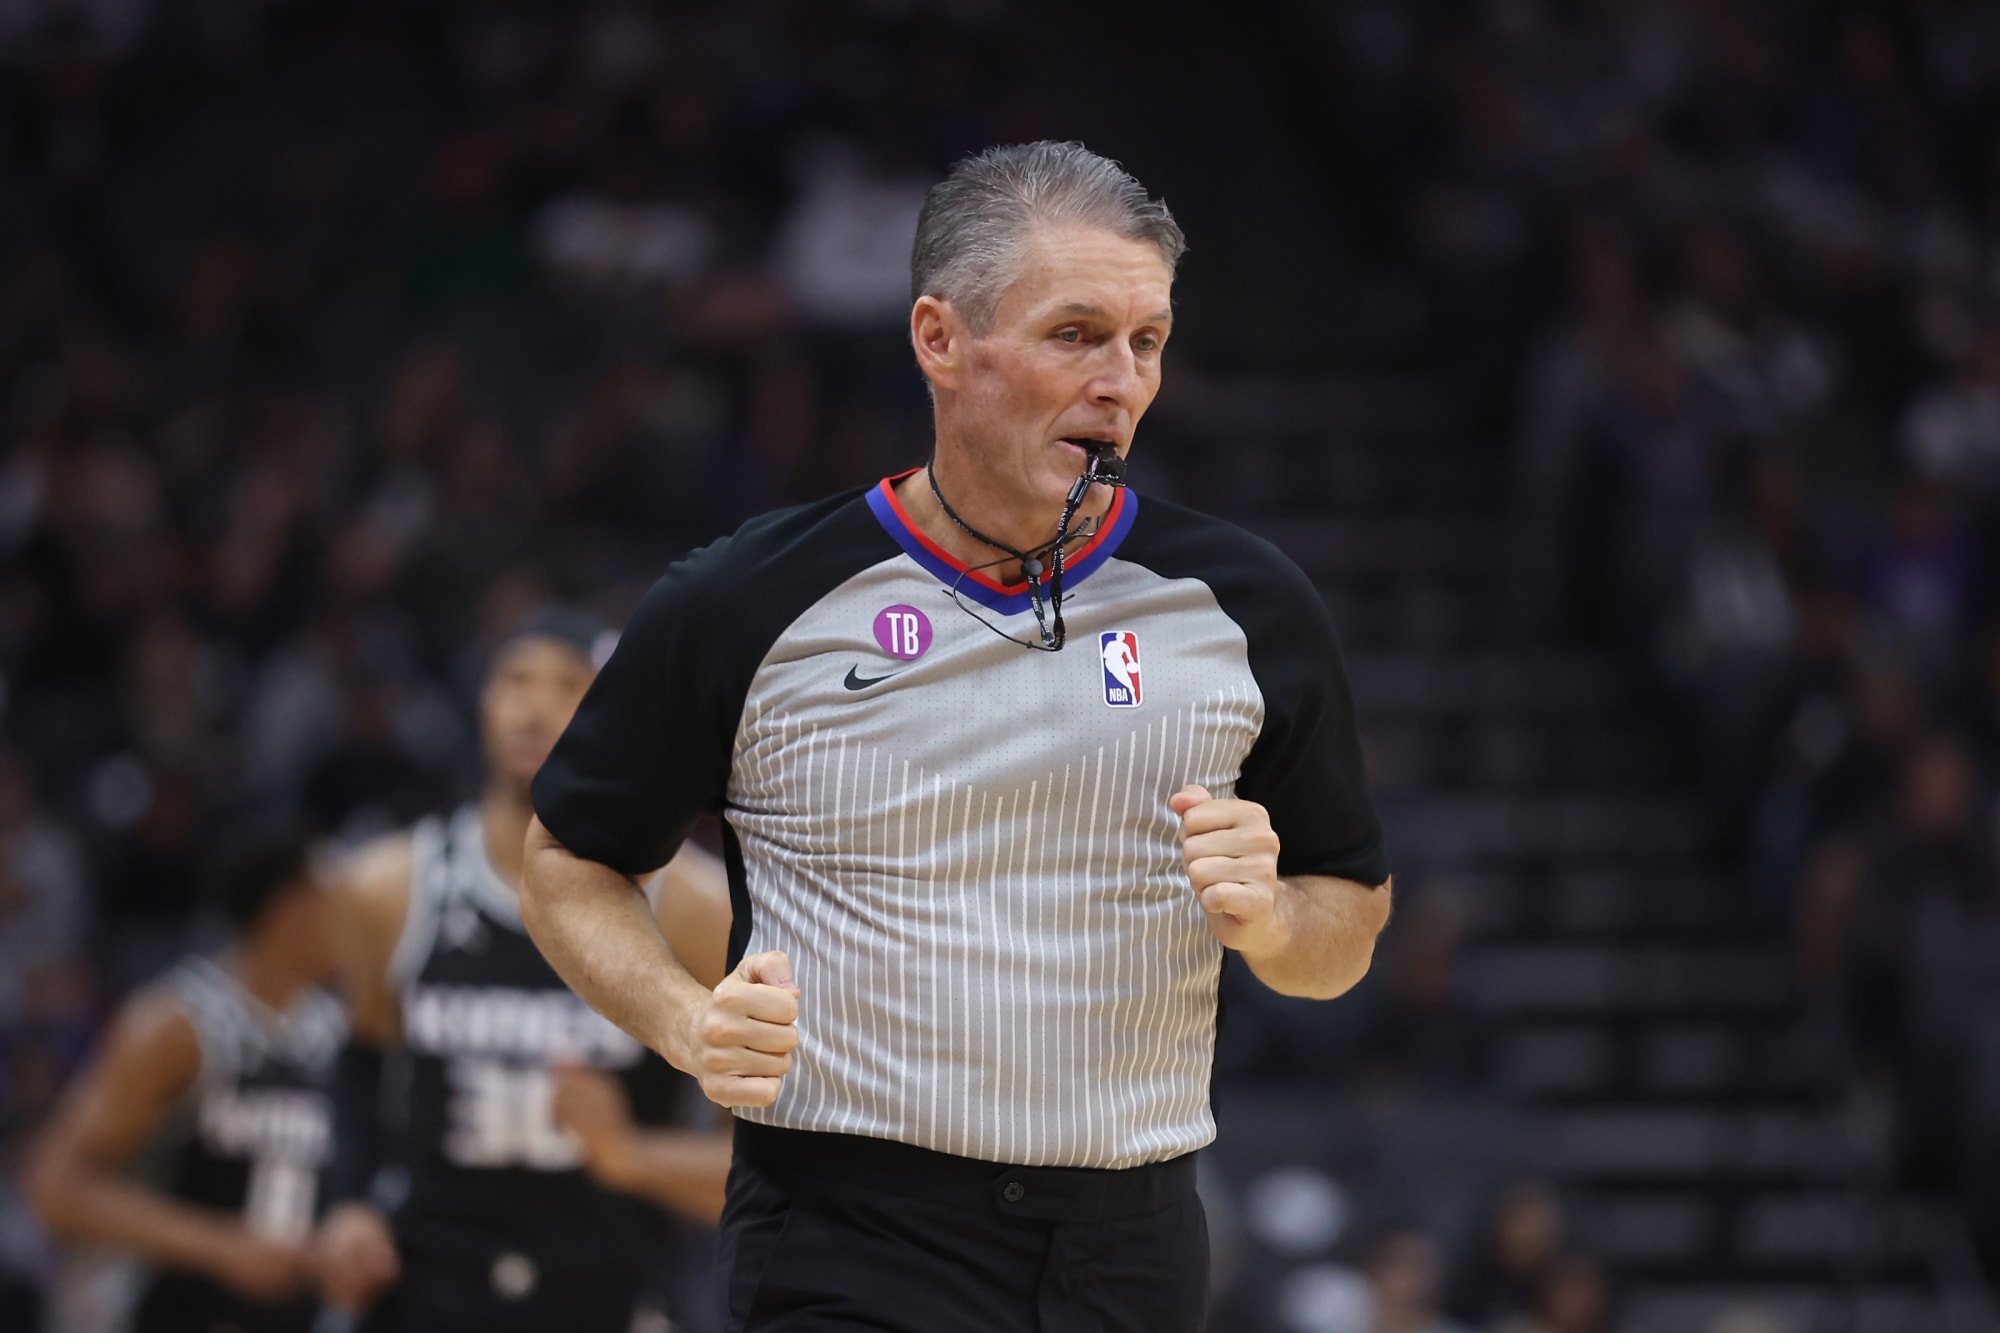 Referee Scott Foster makes a call during the second half of an NBA